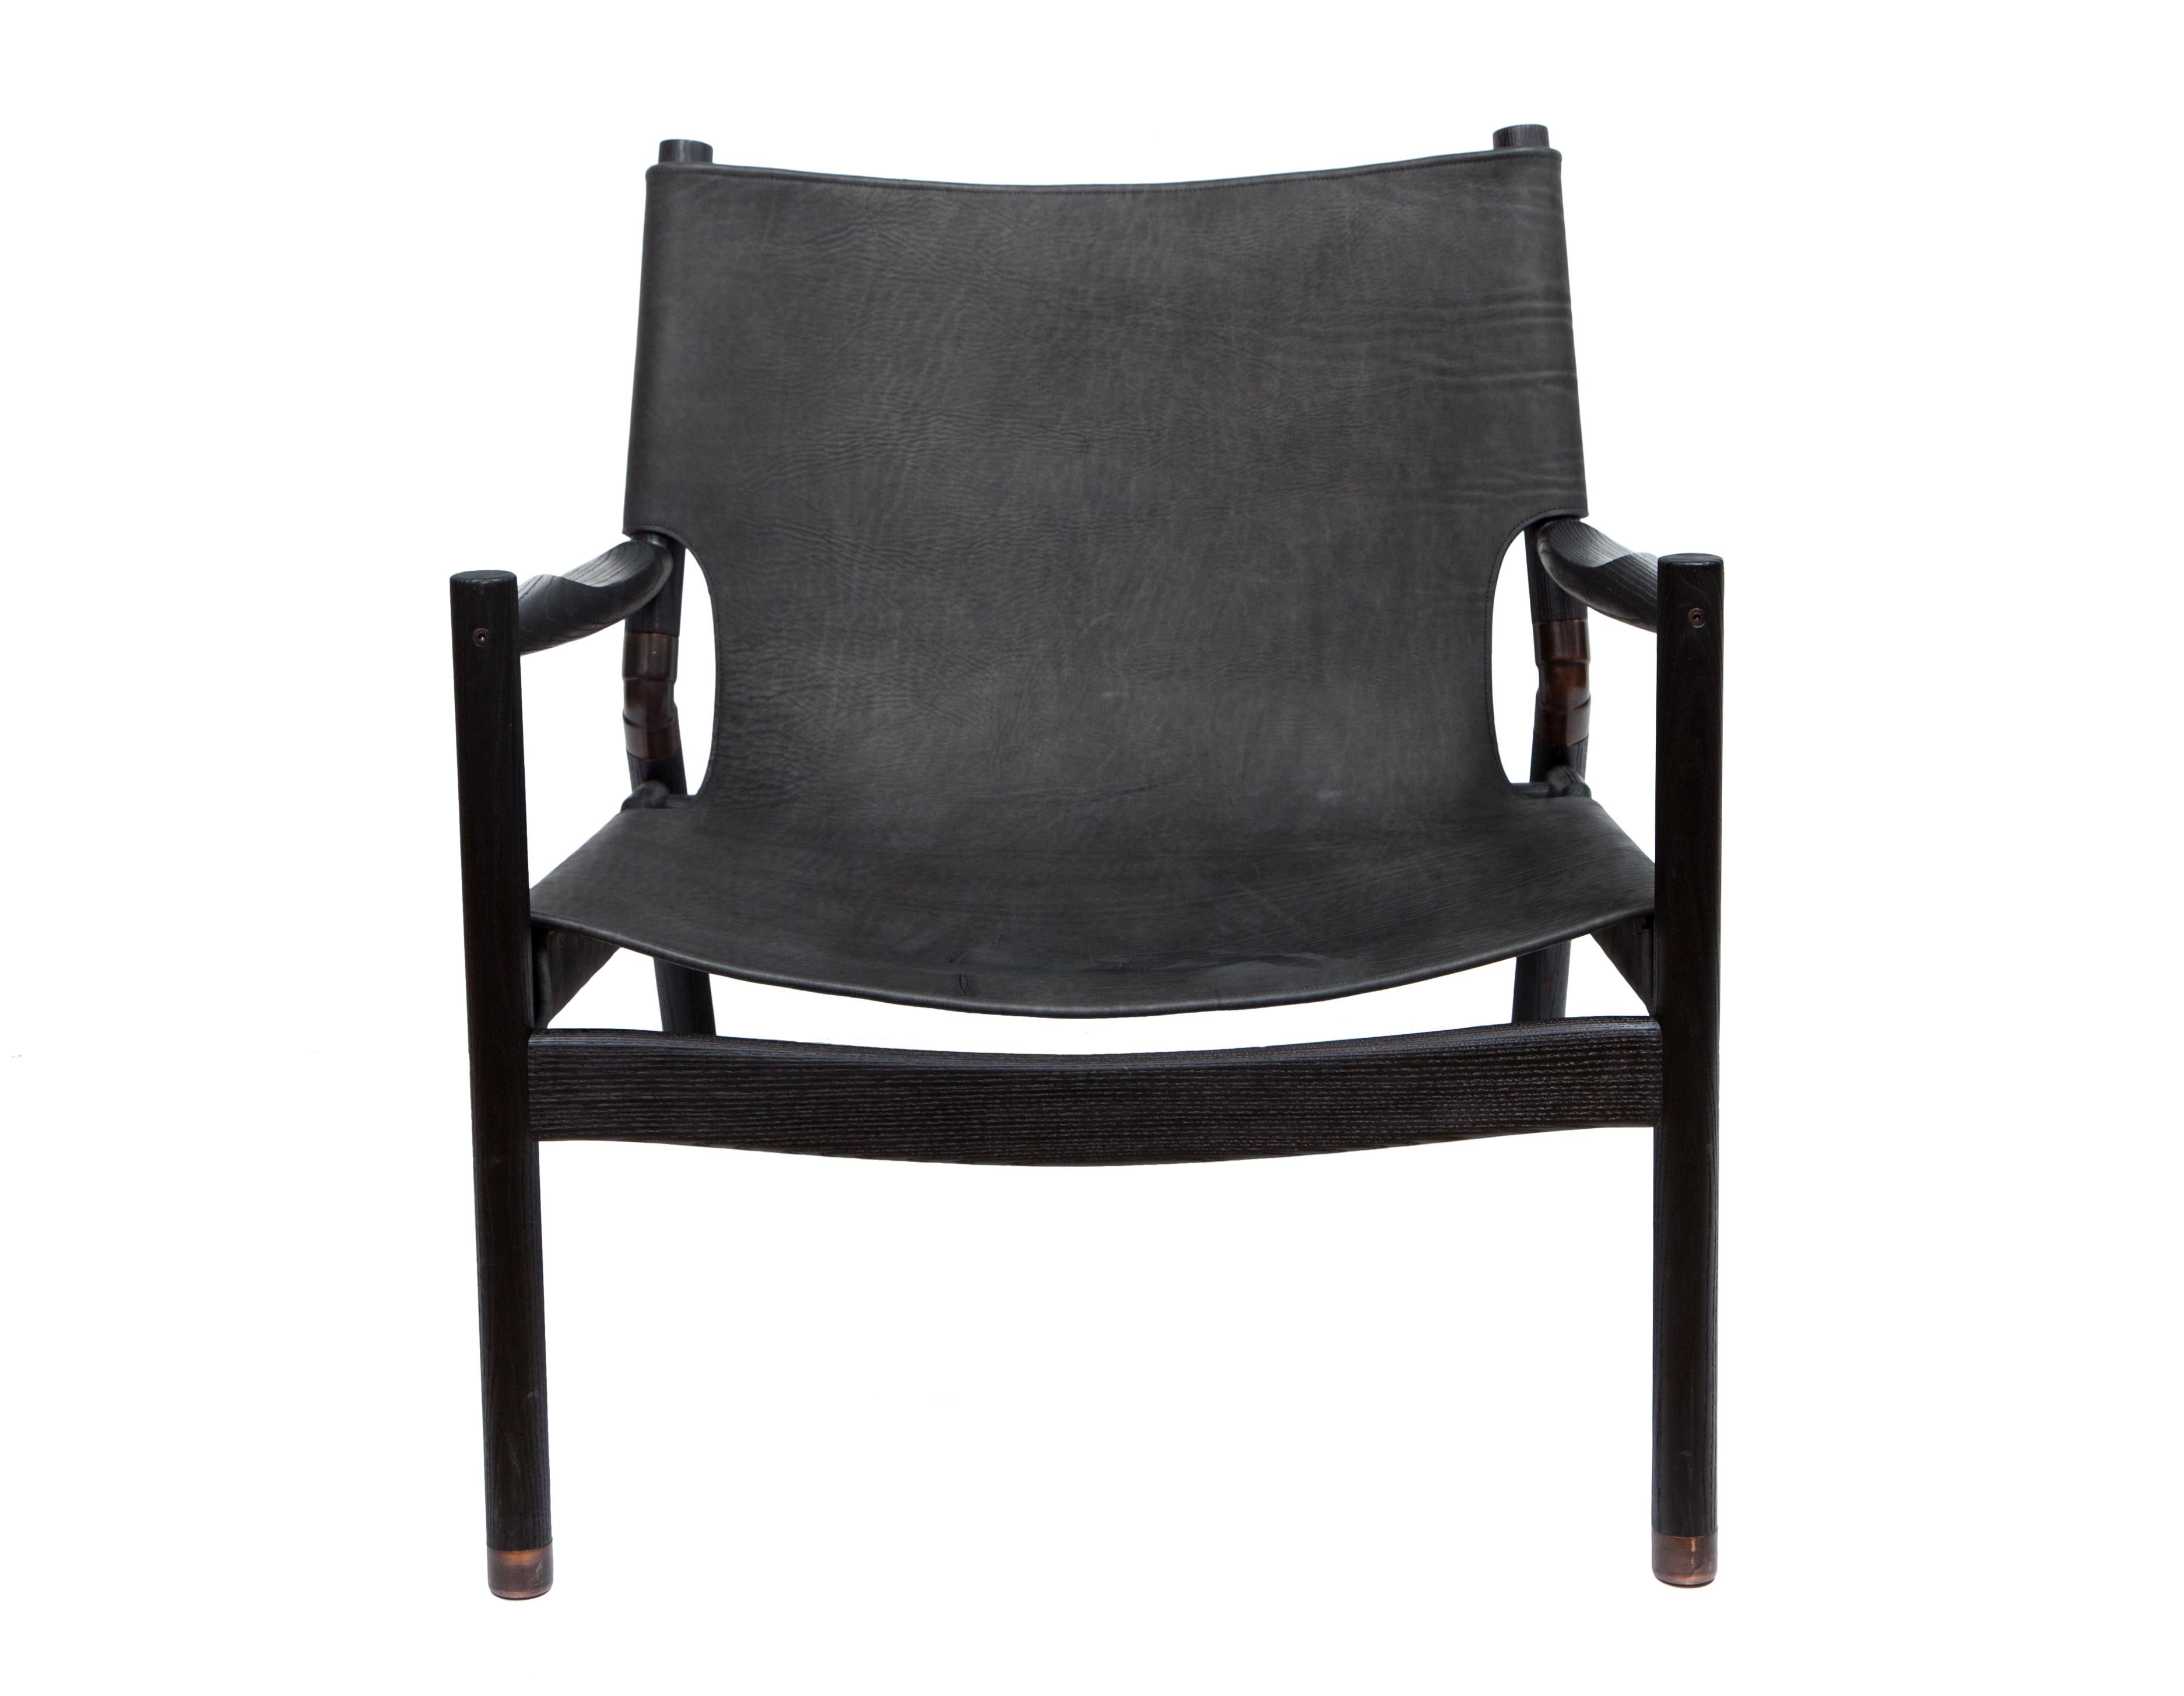 Blackened EÆ Slung Leather Lounge Chair in Charred Oak For Sale